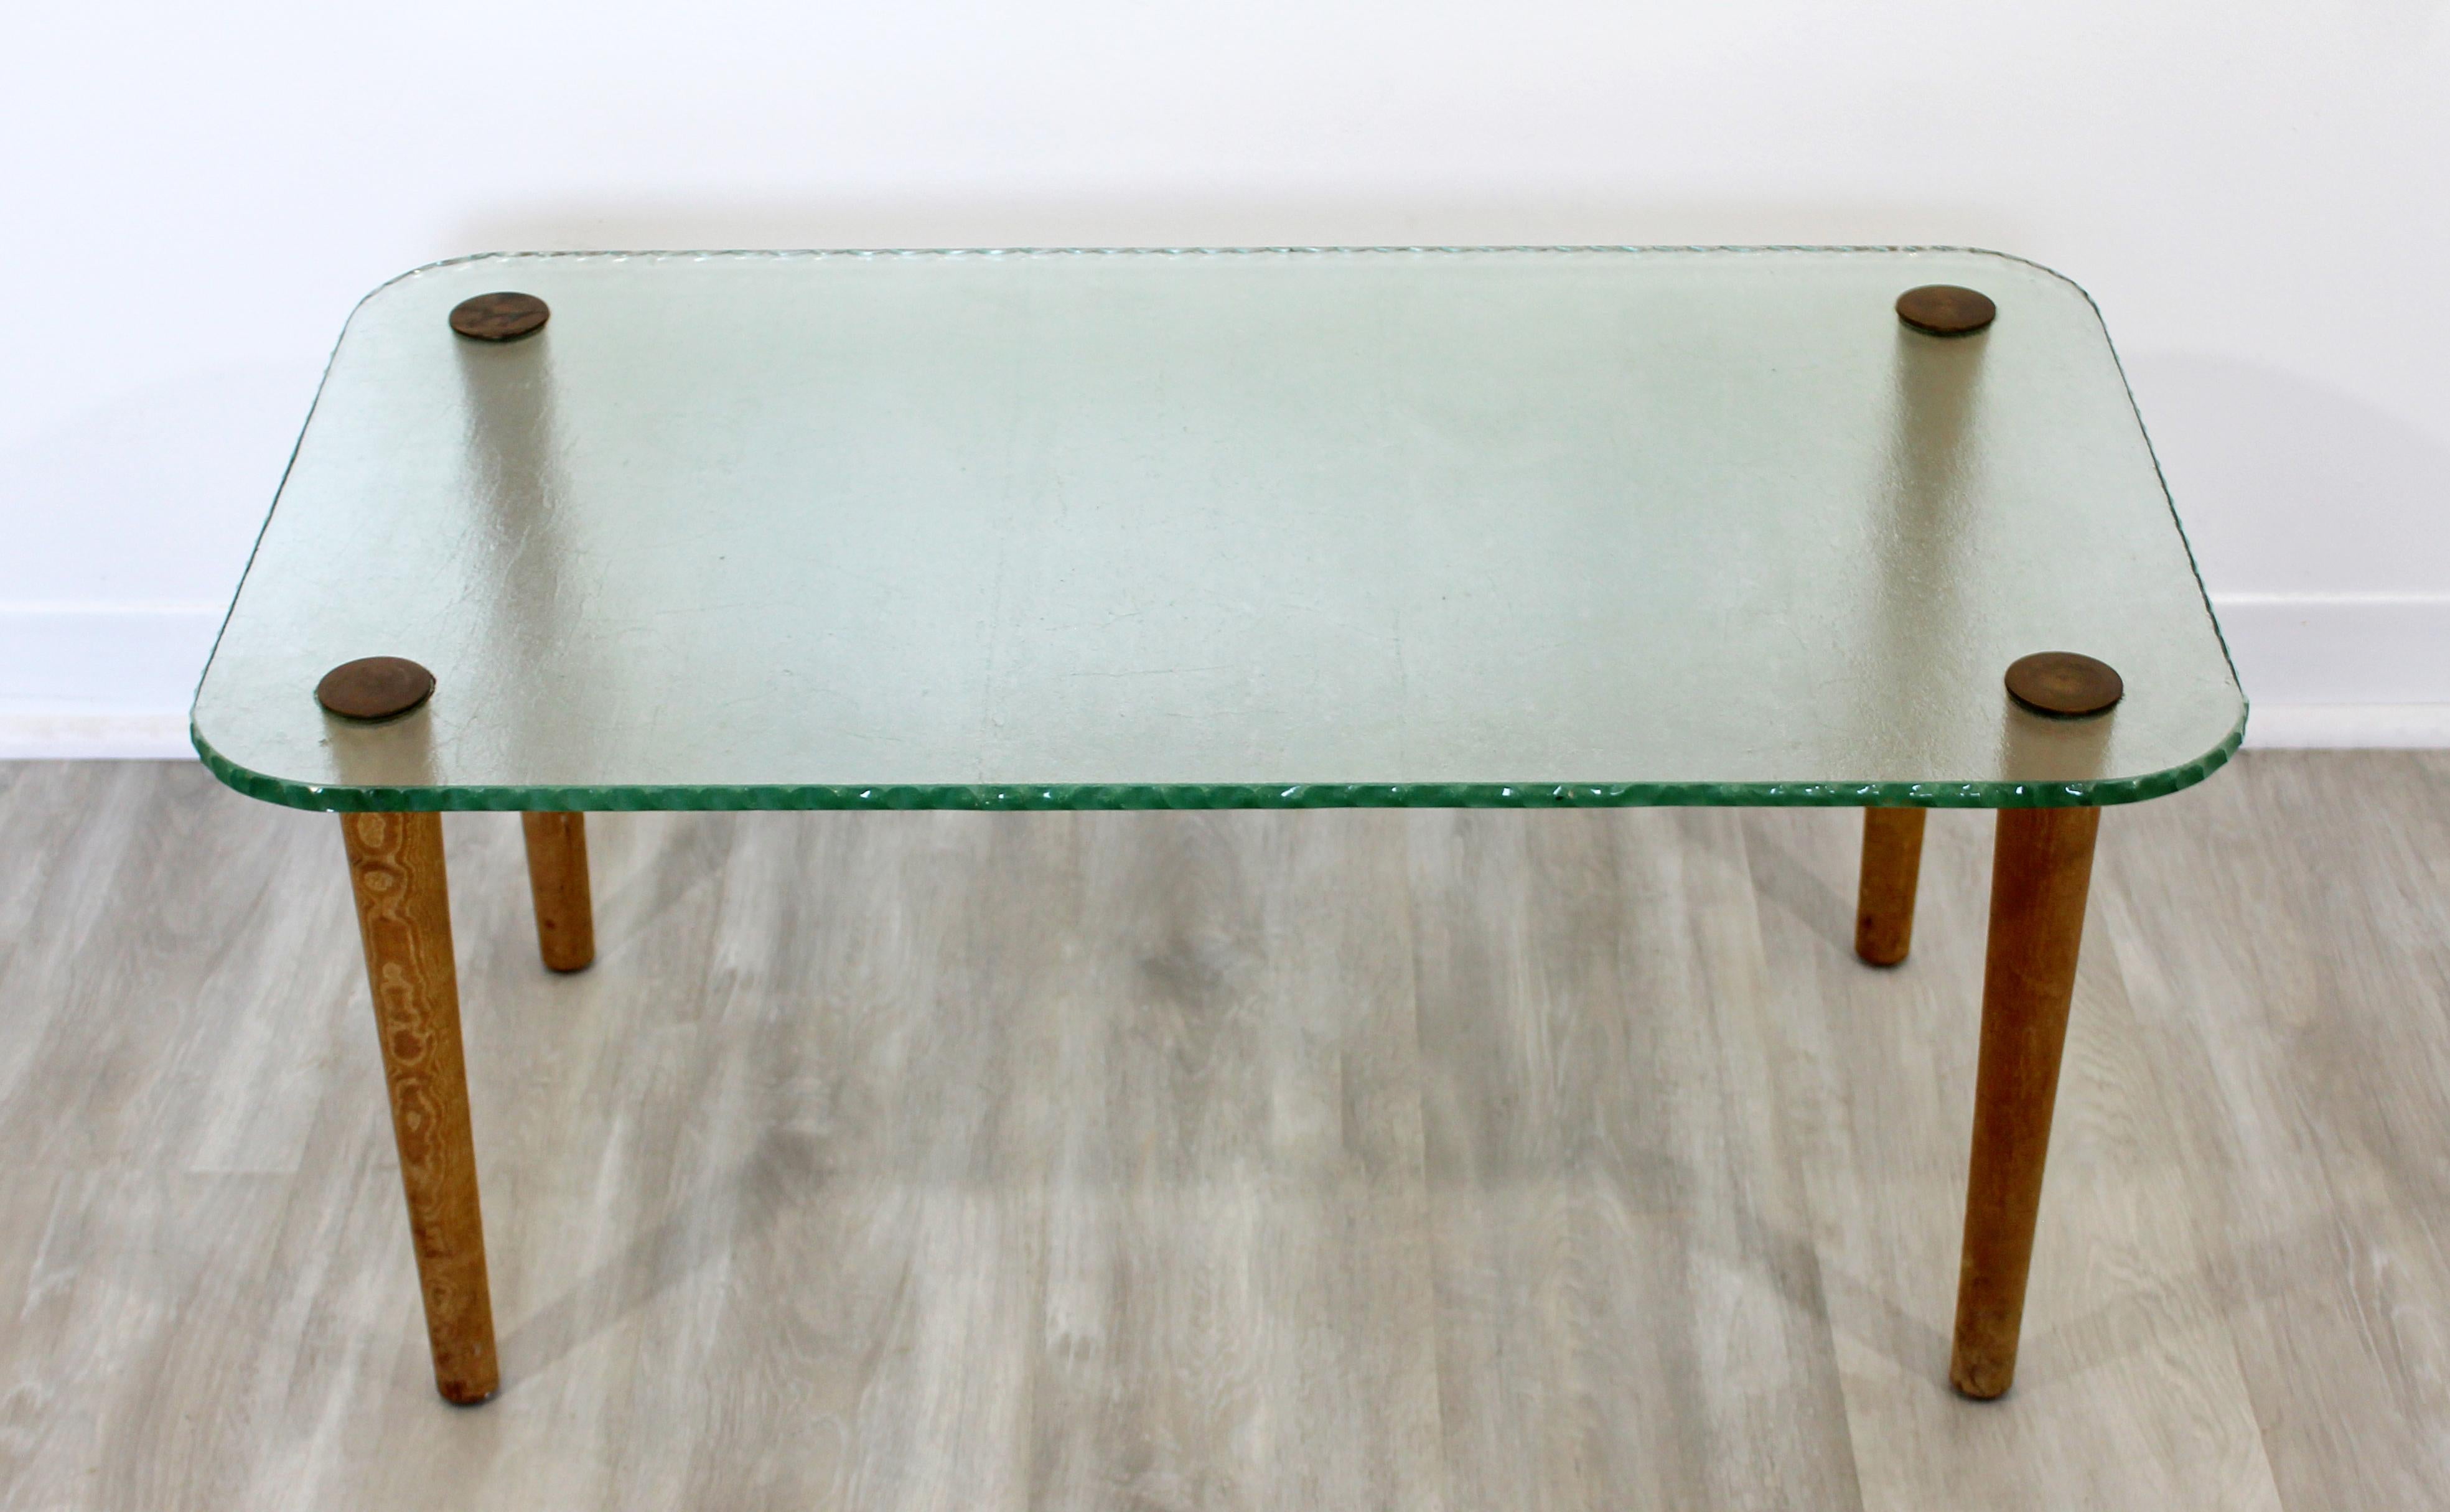 For your consideration is a gorgeous coffee table, with a rectangular, tempered chipped edge glass top on wood legs with bronze caps, in the style of Gilbert Rohde, circa 1940s. In excellent antique condition. The dimensions are 34